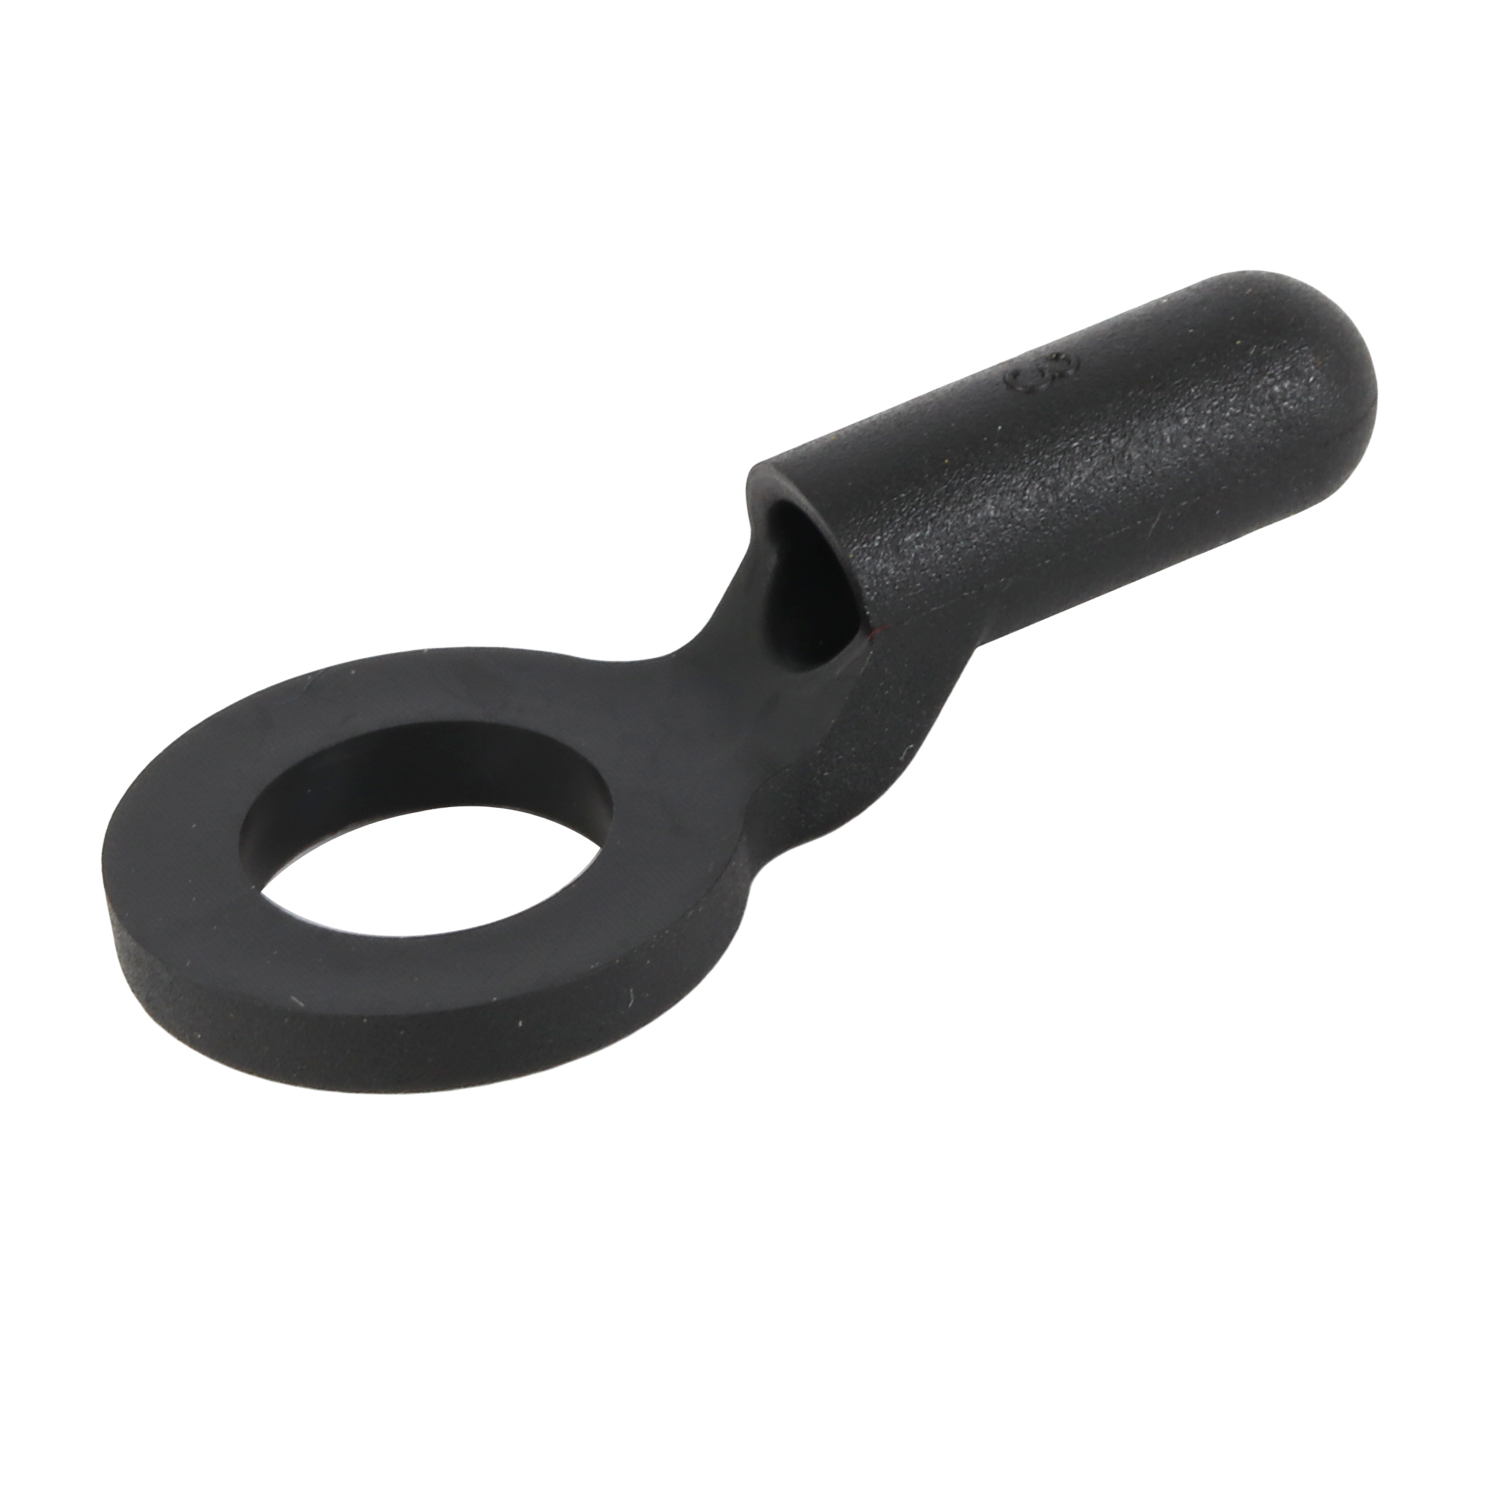 Picture of SKS End Cap for Mudguards - 1 Piece